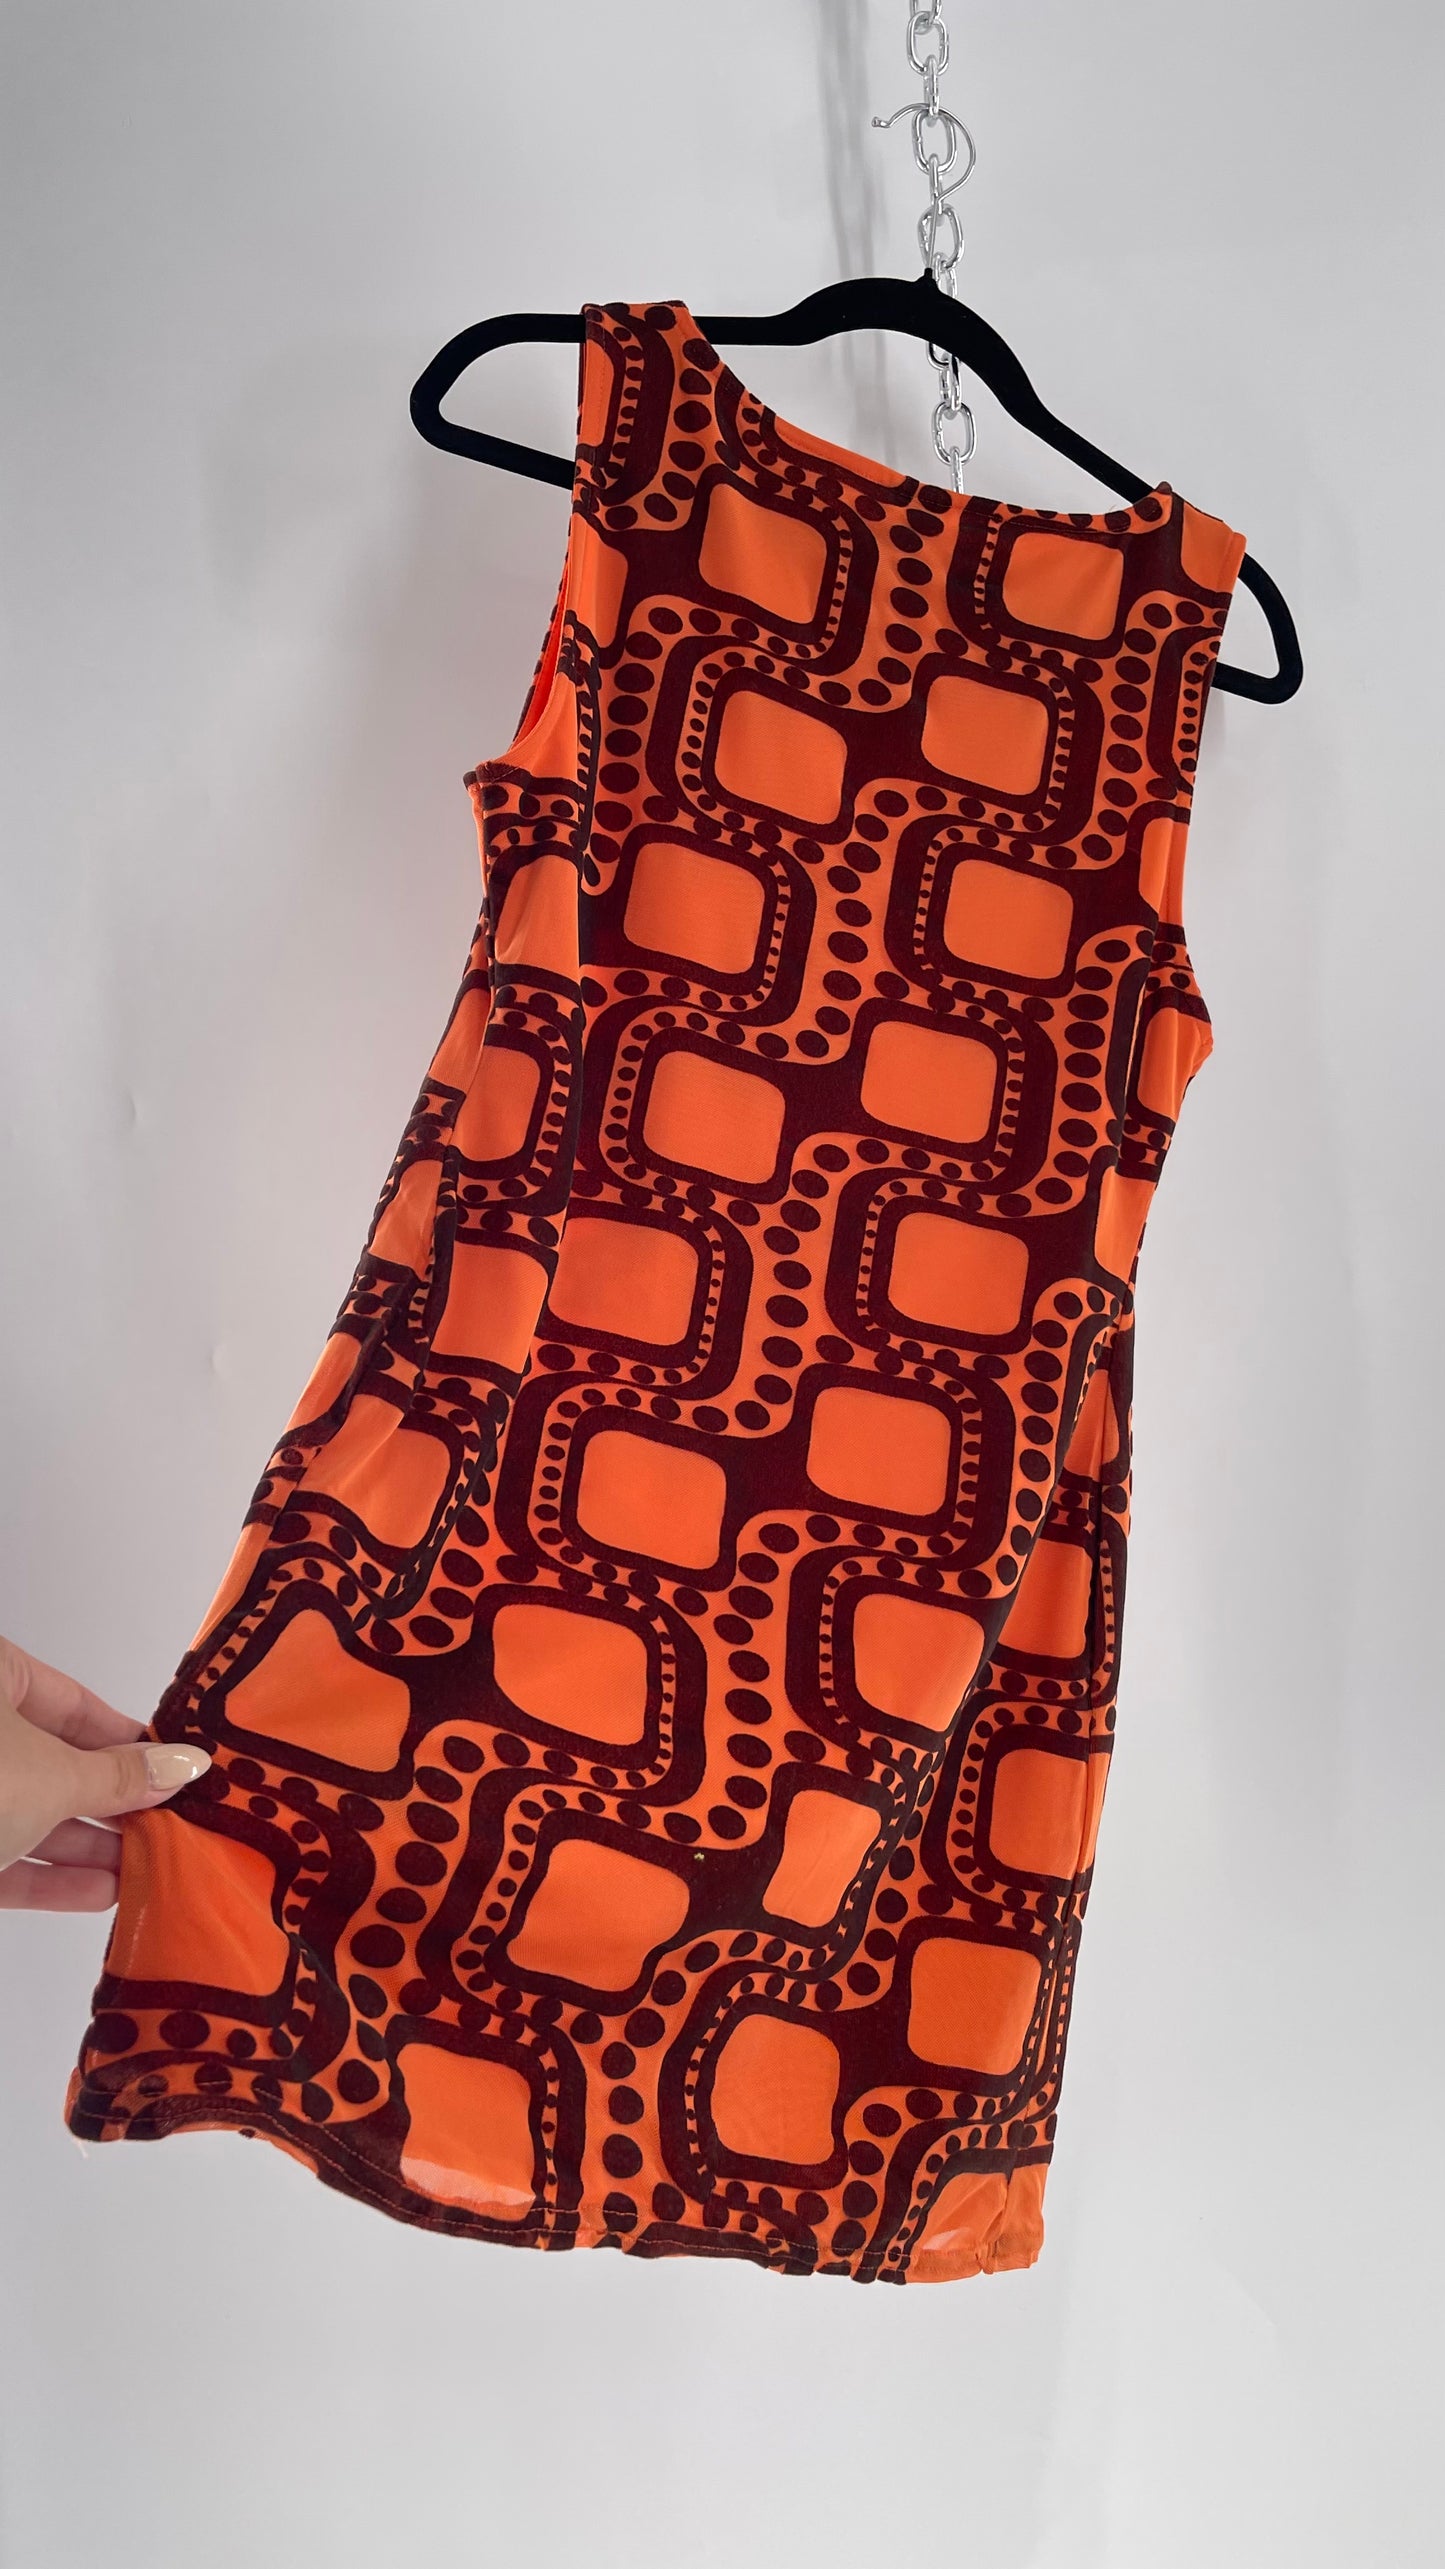 Urban Outfitters Orange Retro Patterned Tunic Dress with Brown Velvet 1970s Print  (Large)